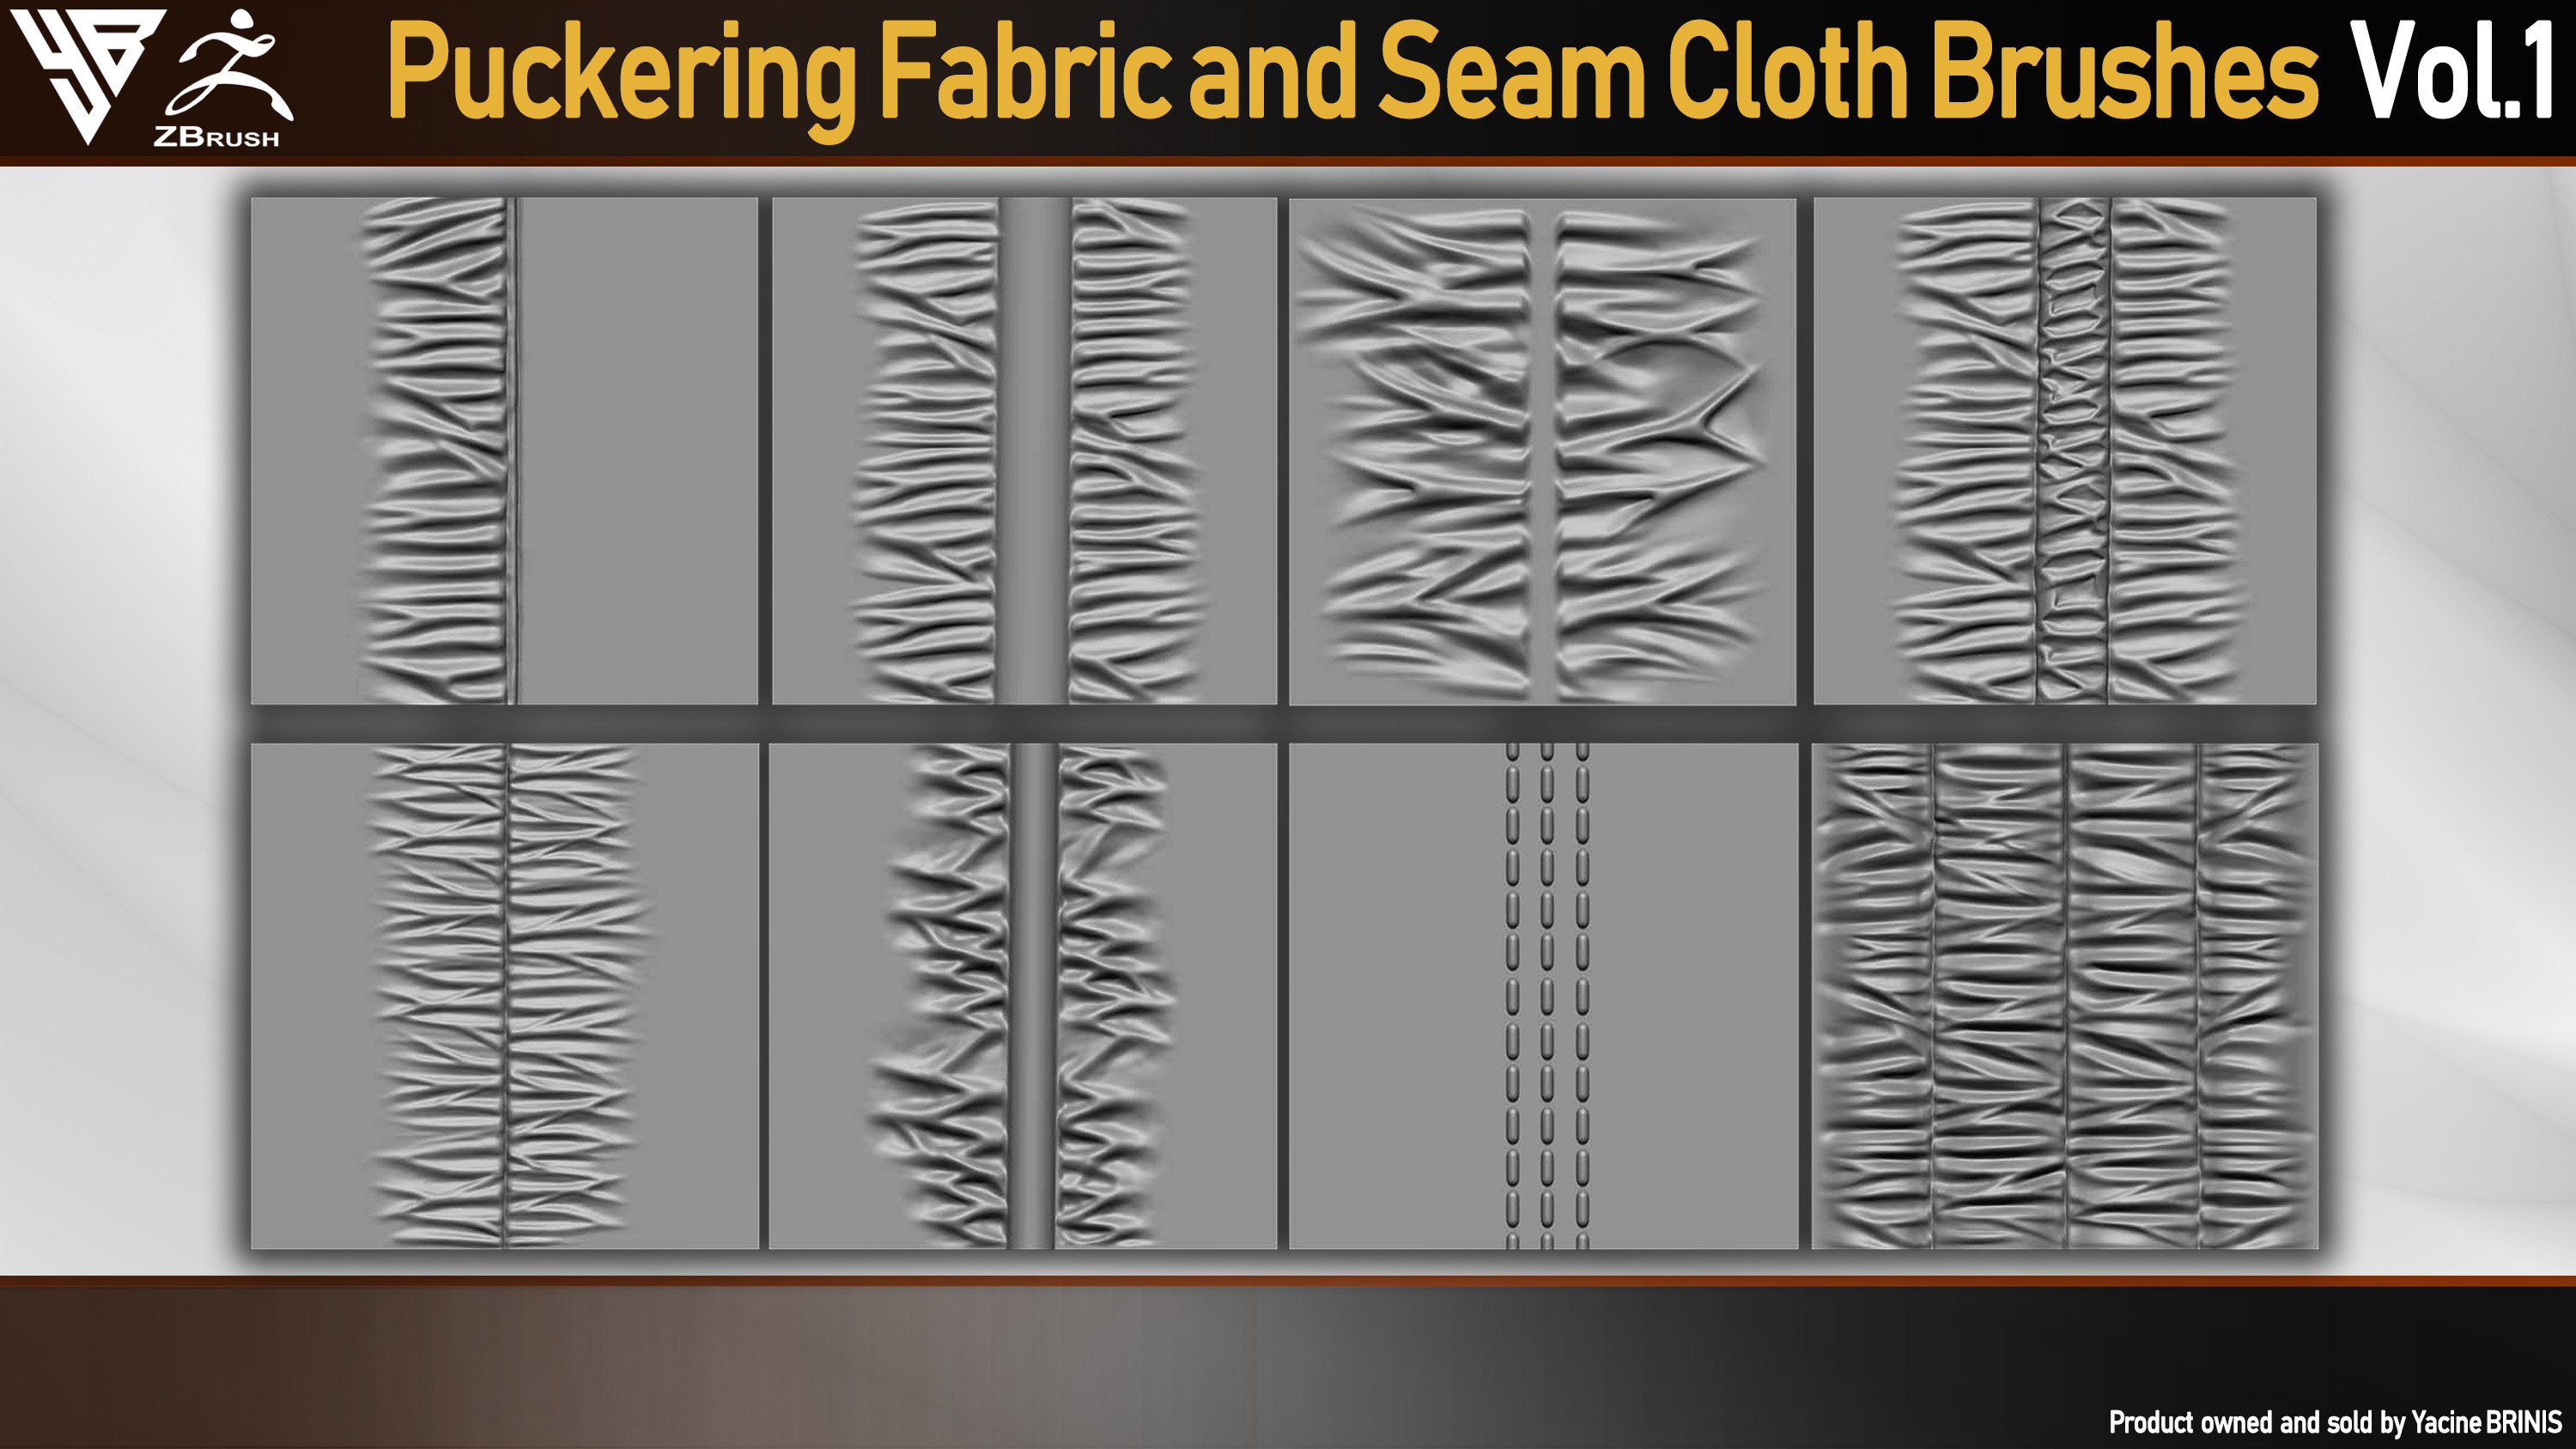 40 Puckering Fabric and Seam Cloth Brushes and Alphaes By Yacine BRINIS 007